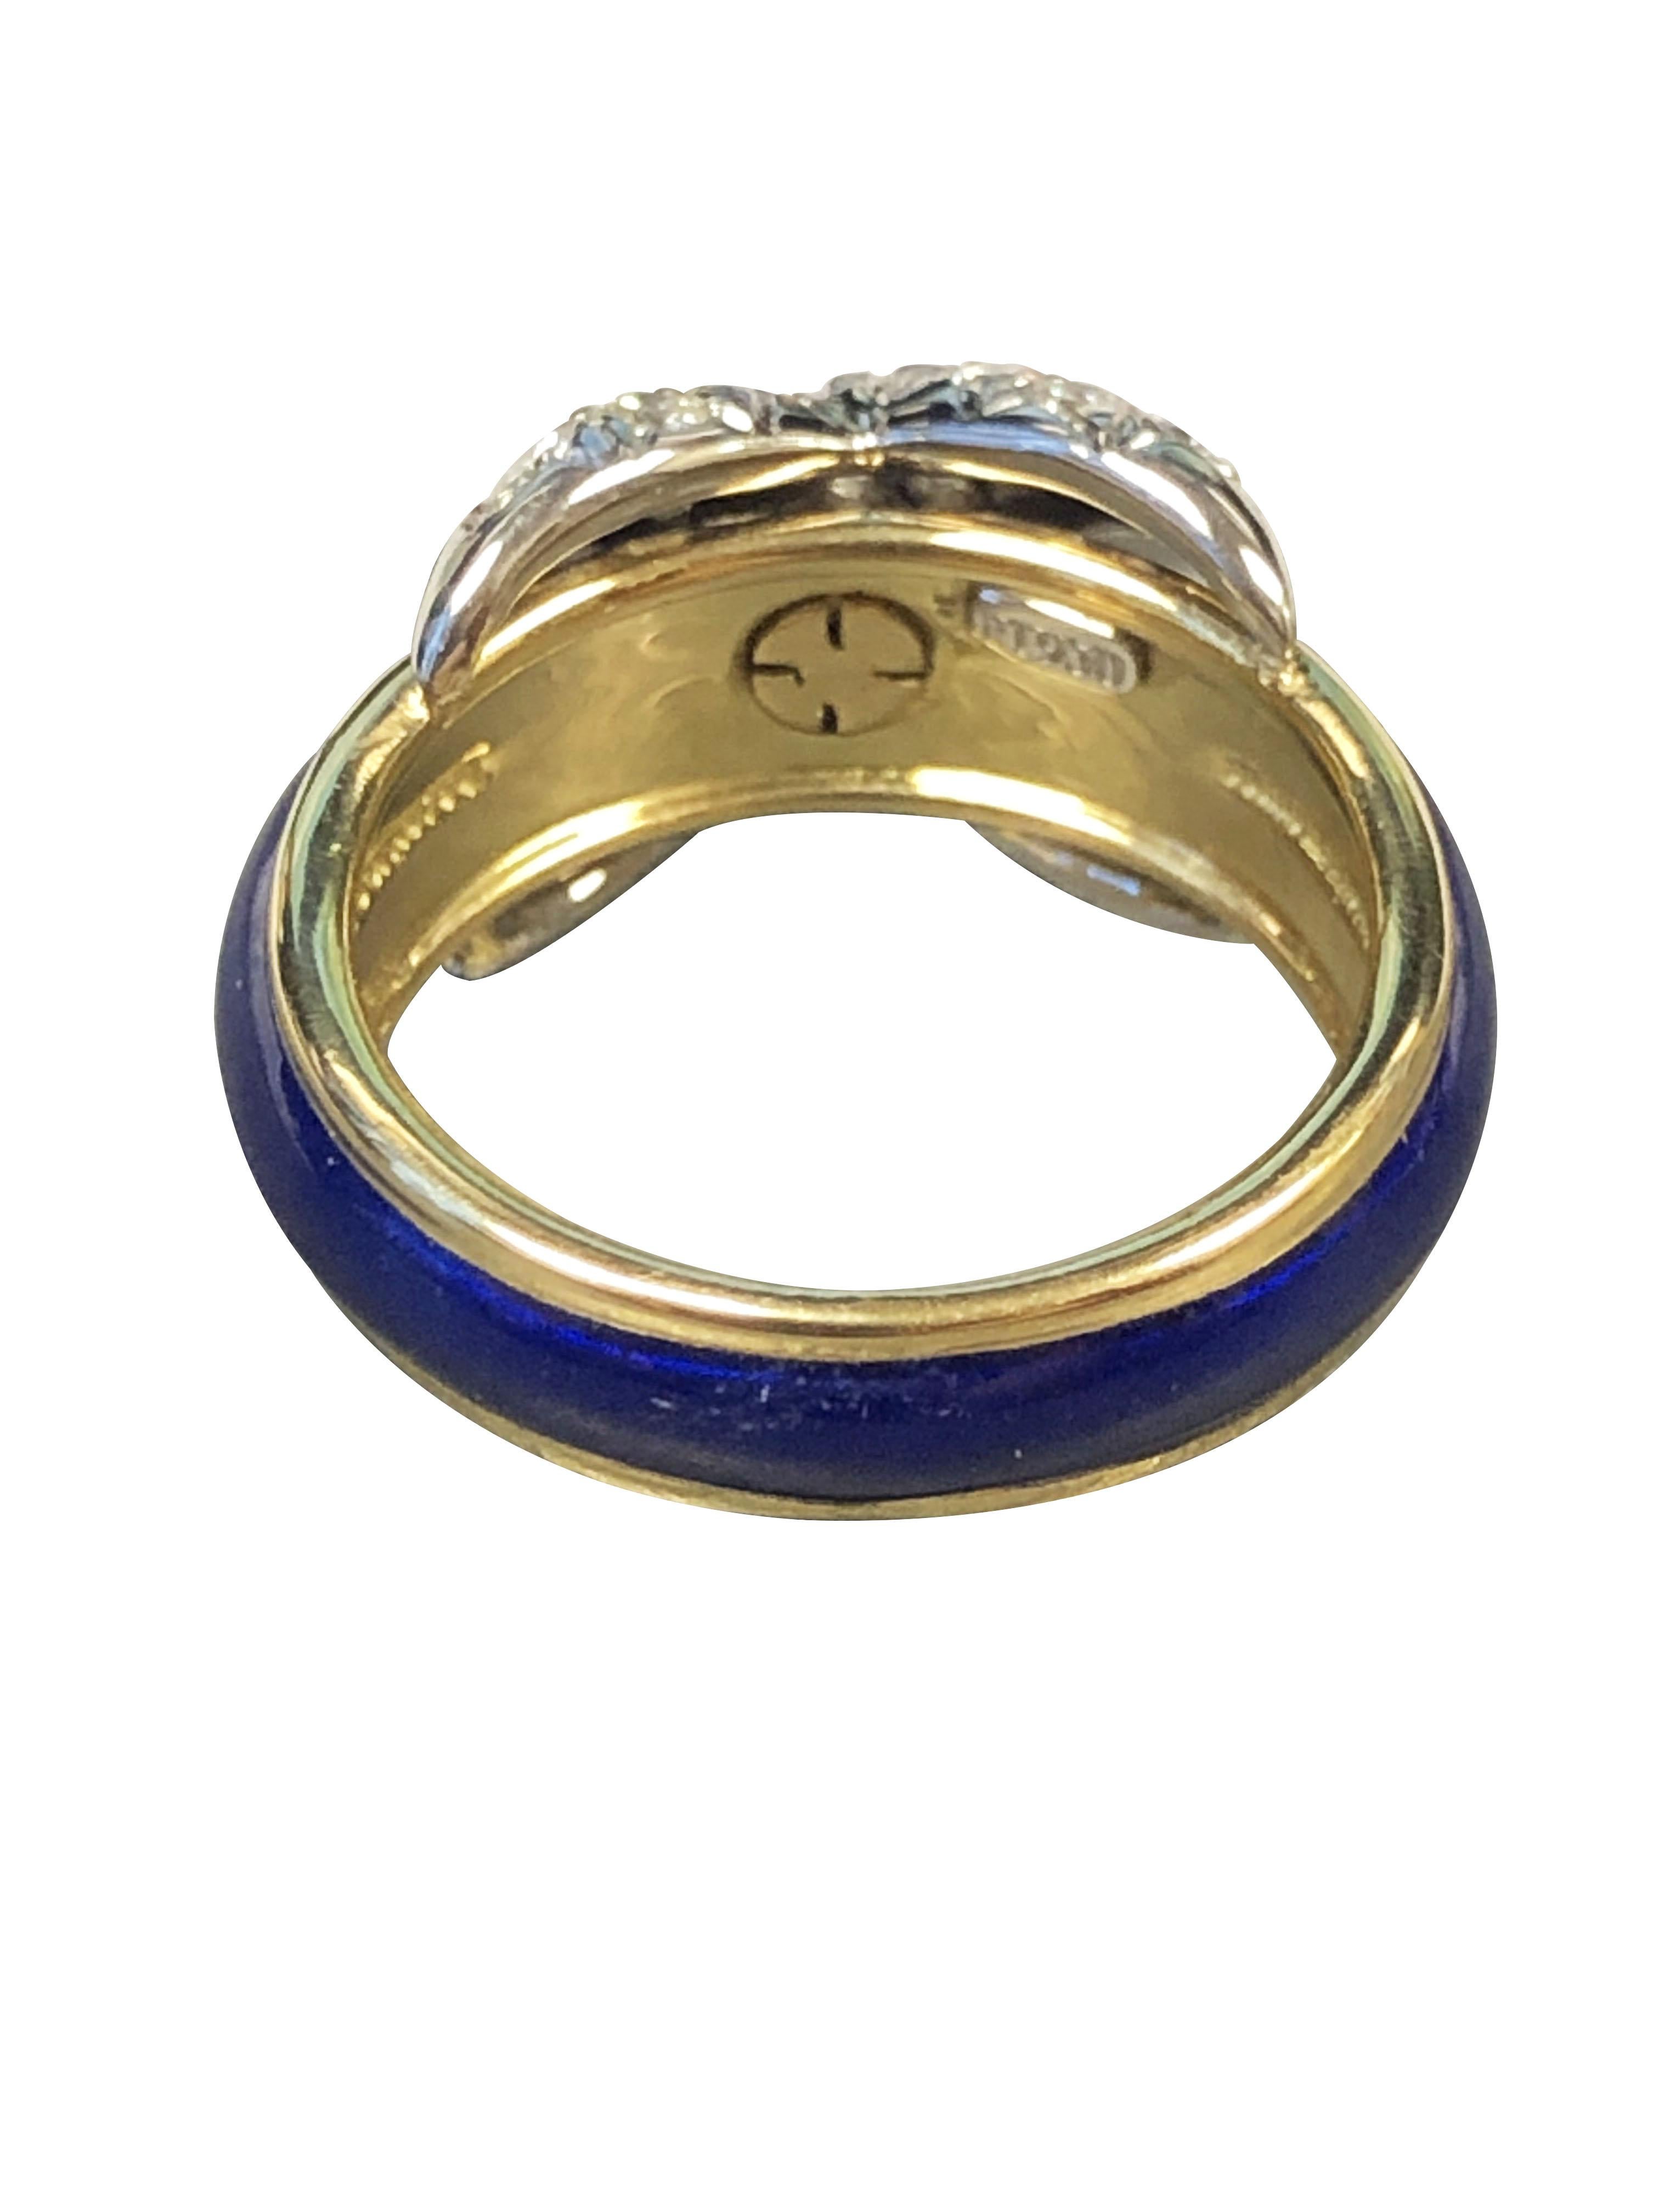 Round Cut Tiffany & Co Schlumberger Platinum Gold X Ring with Diamonds and Enamel